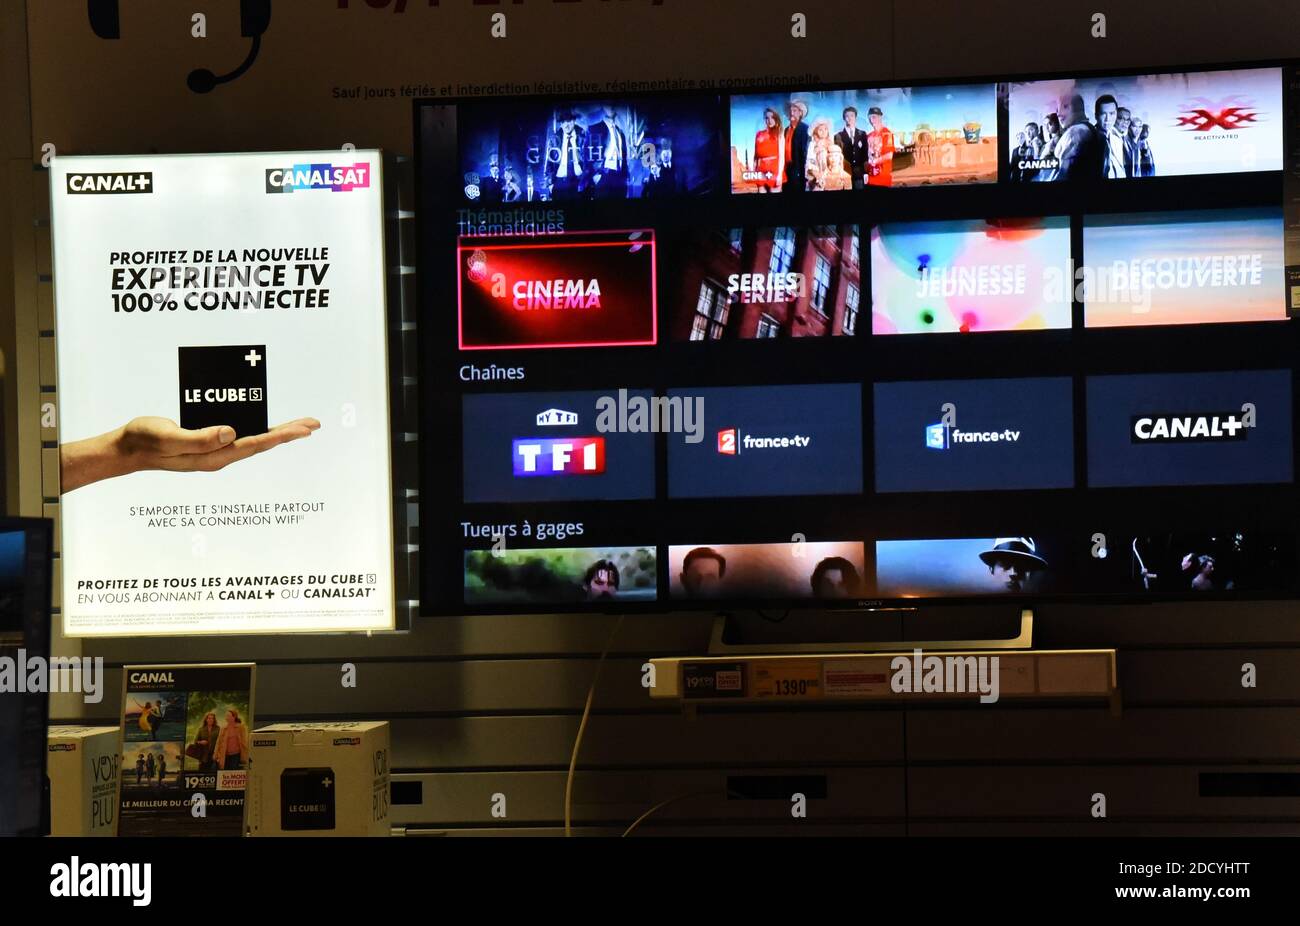 Canal+ items are on display in a retailer shop in Paris, France, March 7, 2018. In a press release Canal+ announced that it was terminating the distribution of the TF1 group’s channels because it could not reach a commercial agreement with the group, whose “unreasonable and unfounded financial requirements” it denounced. “The Canal+ group regrets the stalemate in the negotiations with the TF1 group after eighteen months of discussions and is forced to interrupt the distribution of channels TF1, TMC, TFX, TF1 Séries Films, LCI and their associated services,” according to the statement. Photo by Stock Photo